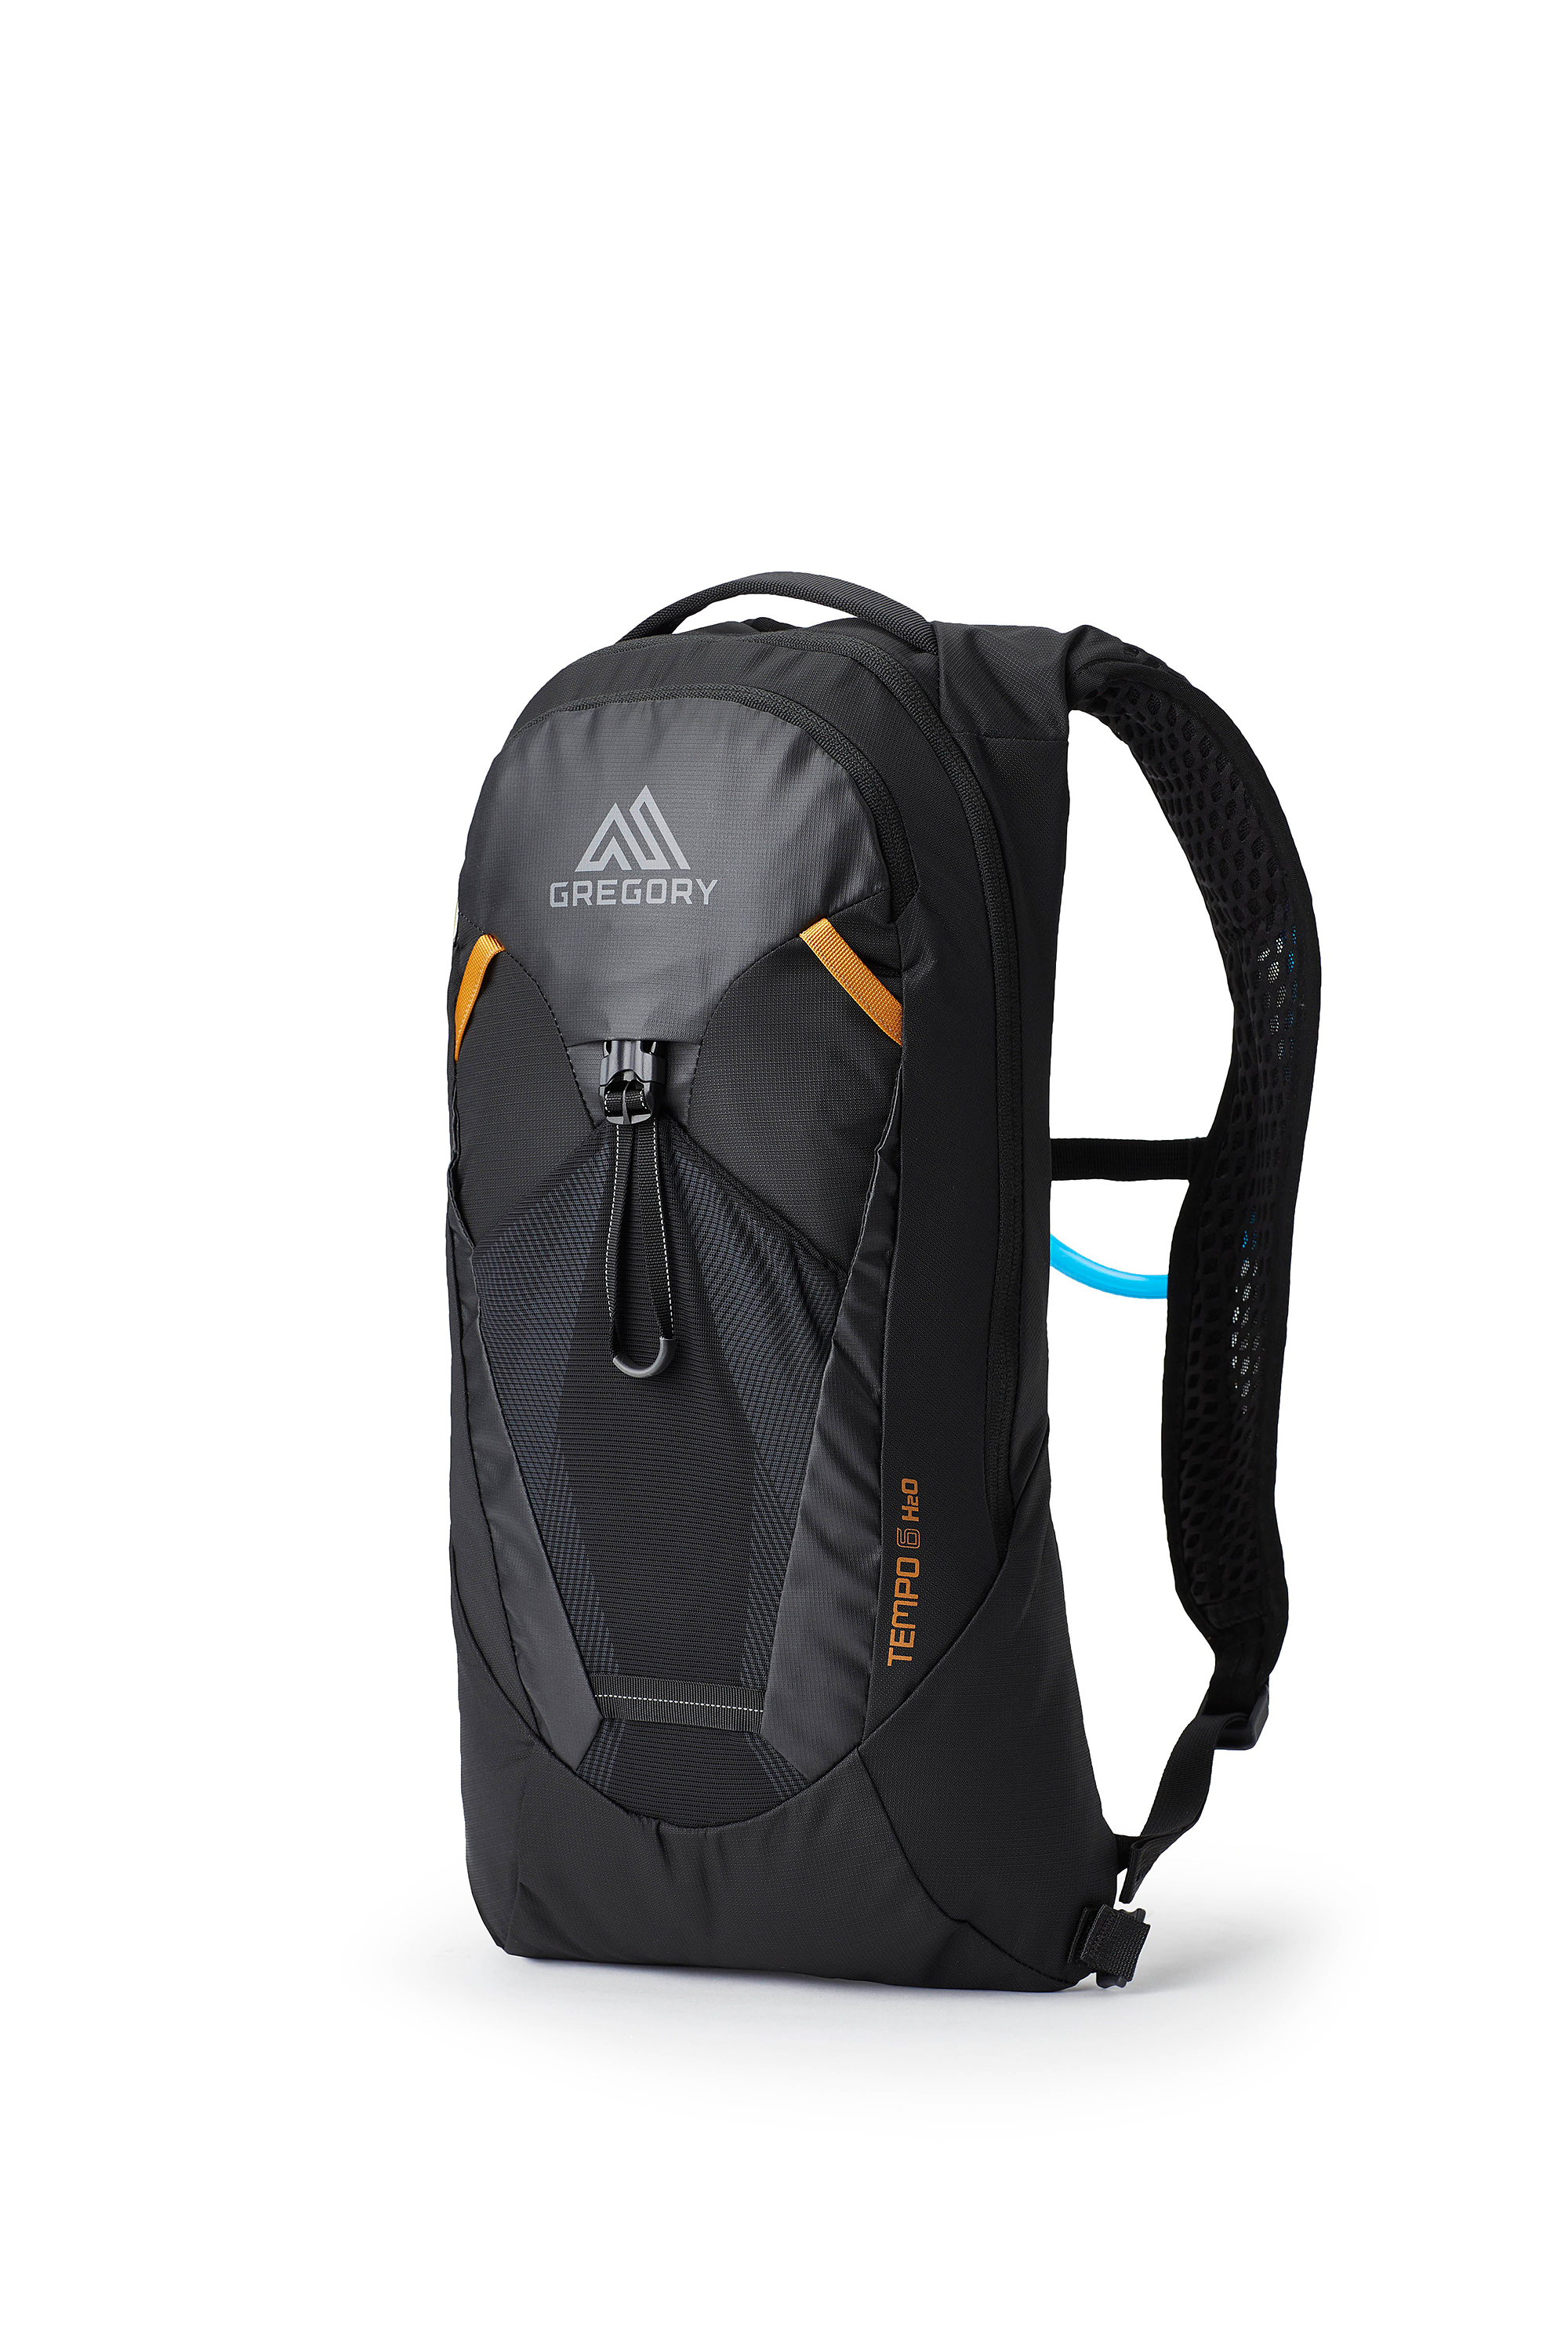 Gregory Tempo 6 H20 Hydration Pack for Men - Carbon Bronze